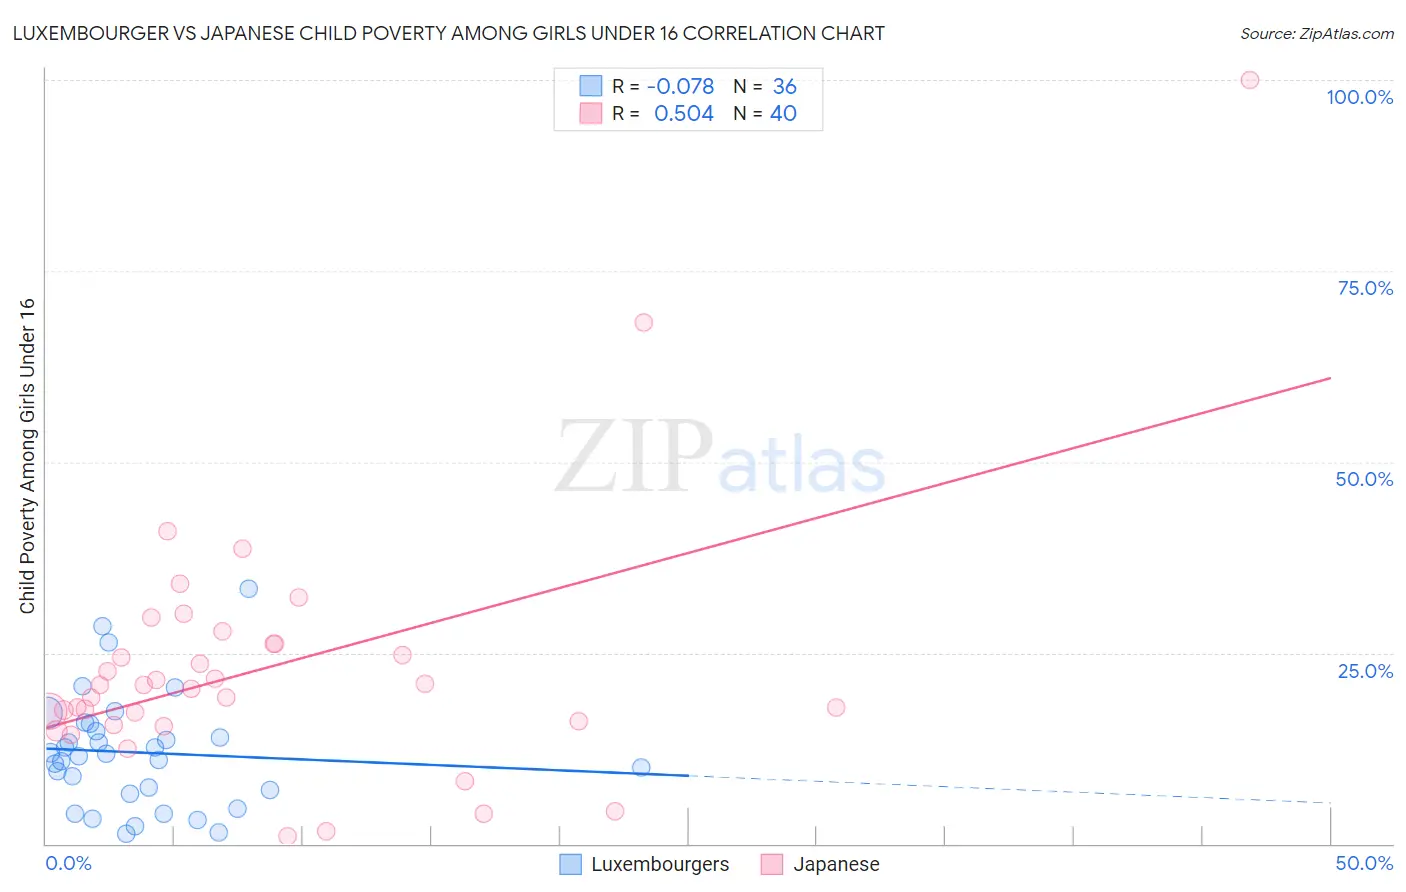 Luxembourger vs Japanese Child Poverty Among Girls Under 16